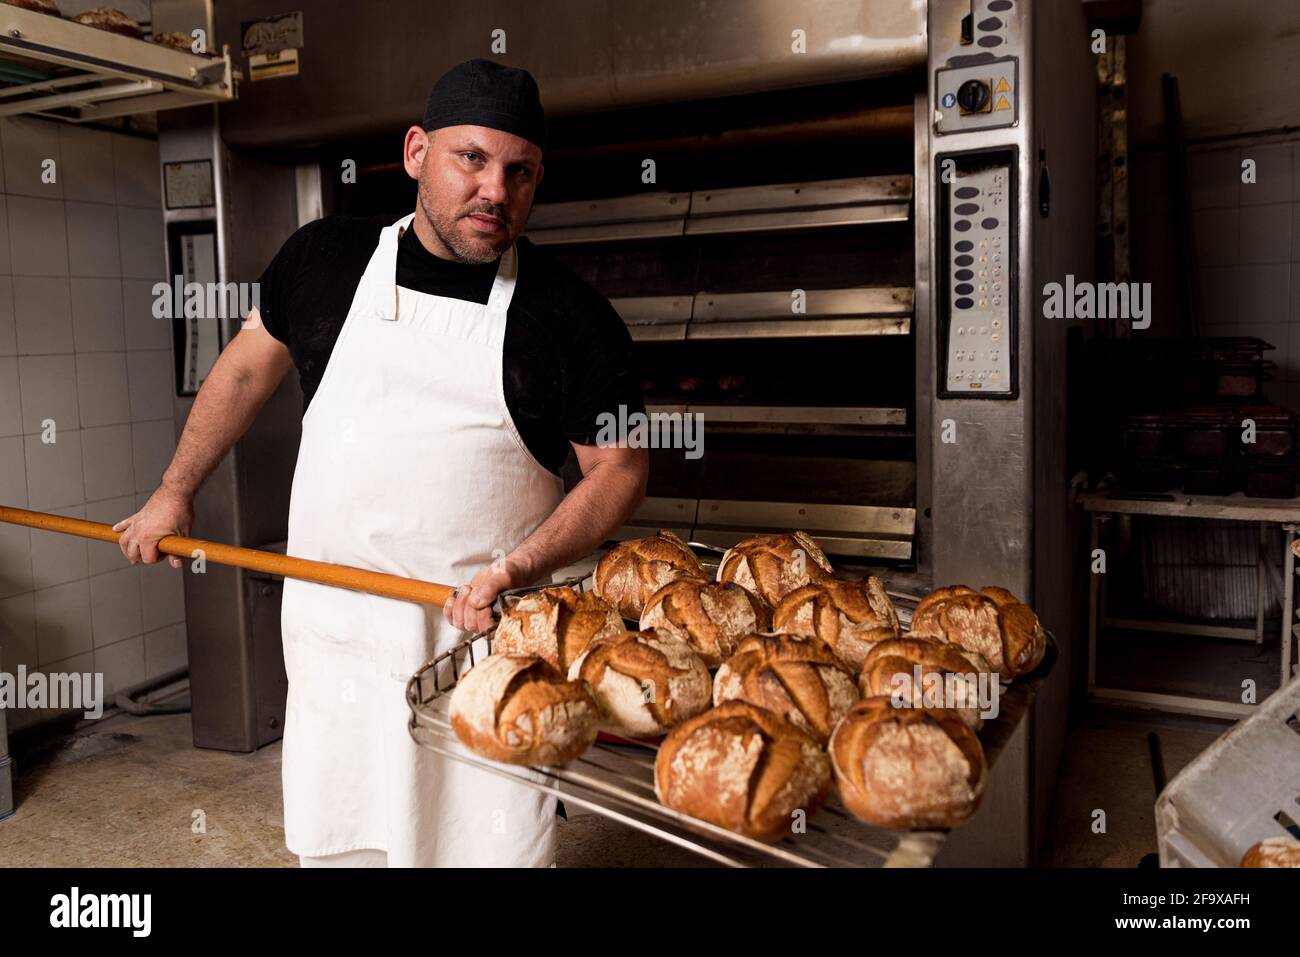 https://c8.alamy.com/comp/2F9XAFH/professional-bread-baker-in-bakery-shop-and-posing-with-shelf-with-uncooked-raw-bread-knead-on-shovel-concept-of-traditional-manual-bread-preparation-2F9XAFH.jpg